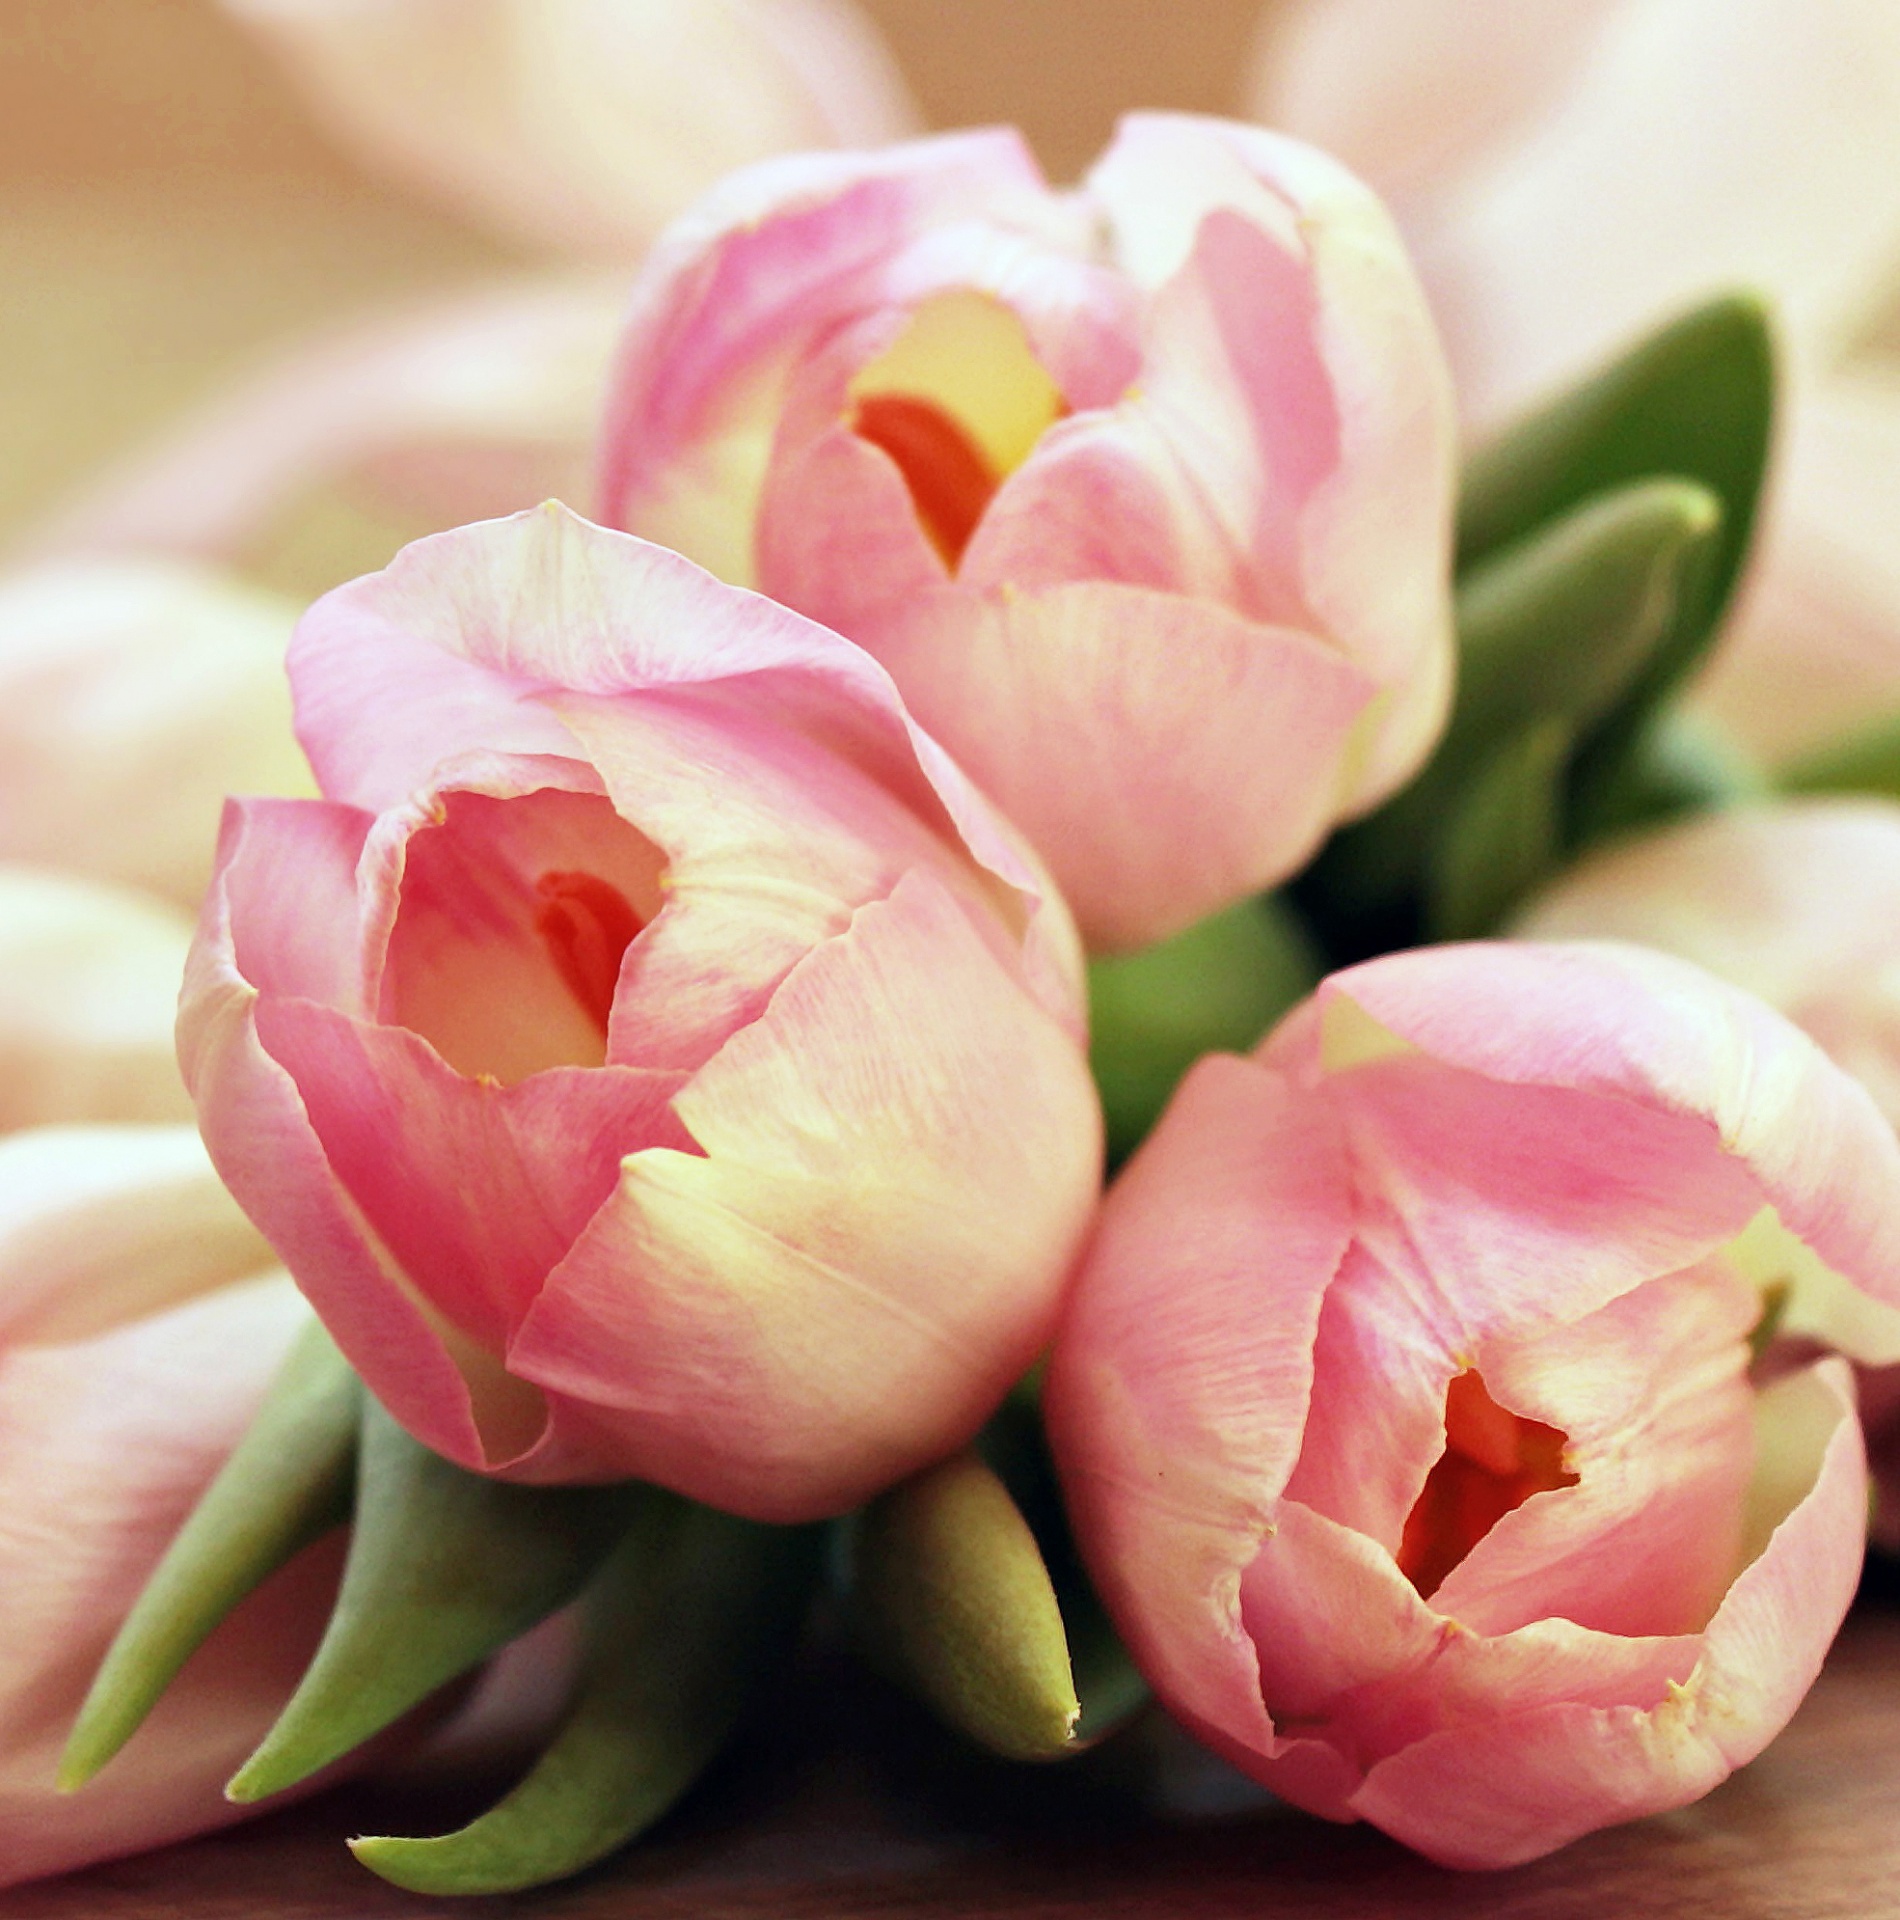 Download Free Photo Of Tulip Tulips Flower Flowers Pink From Needpix Com